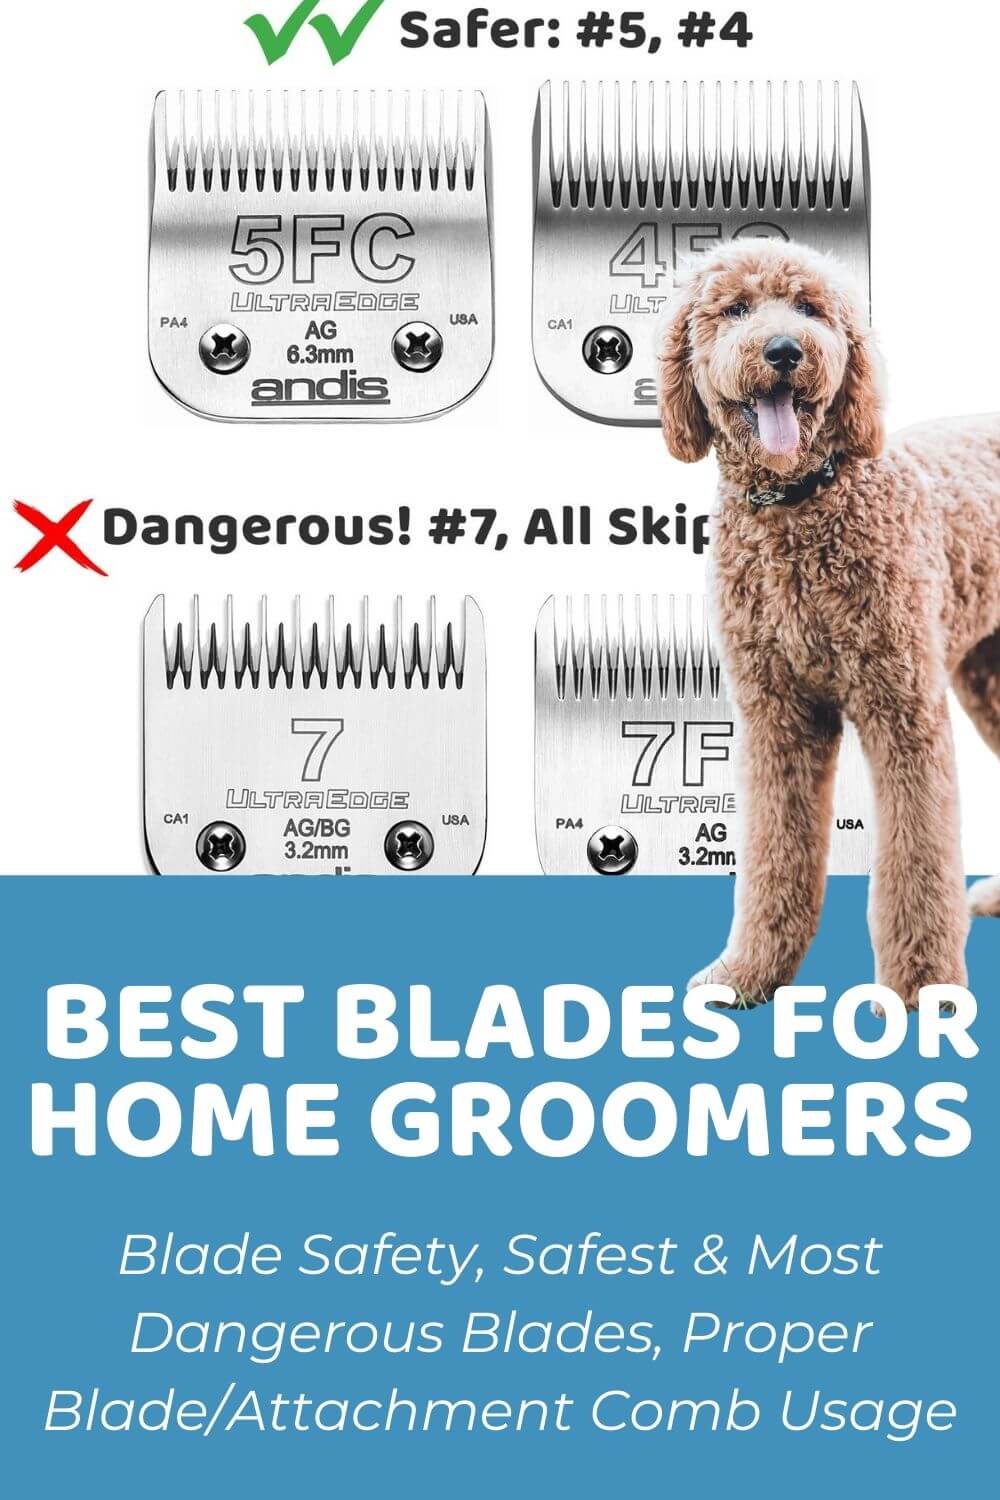 Blade Safety and Best Blades For Home Groomers